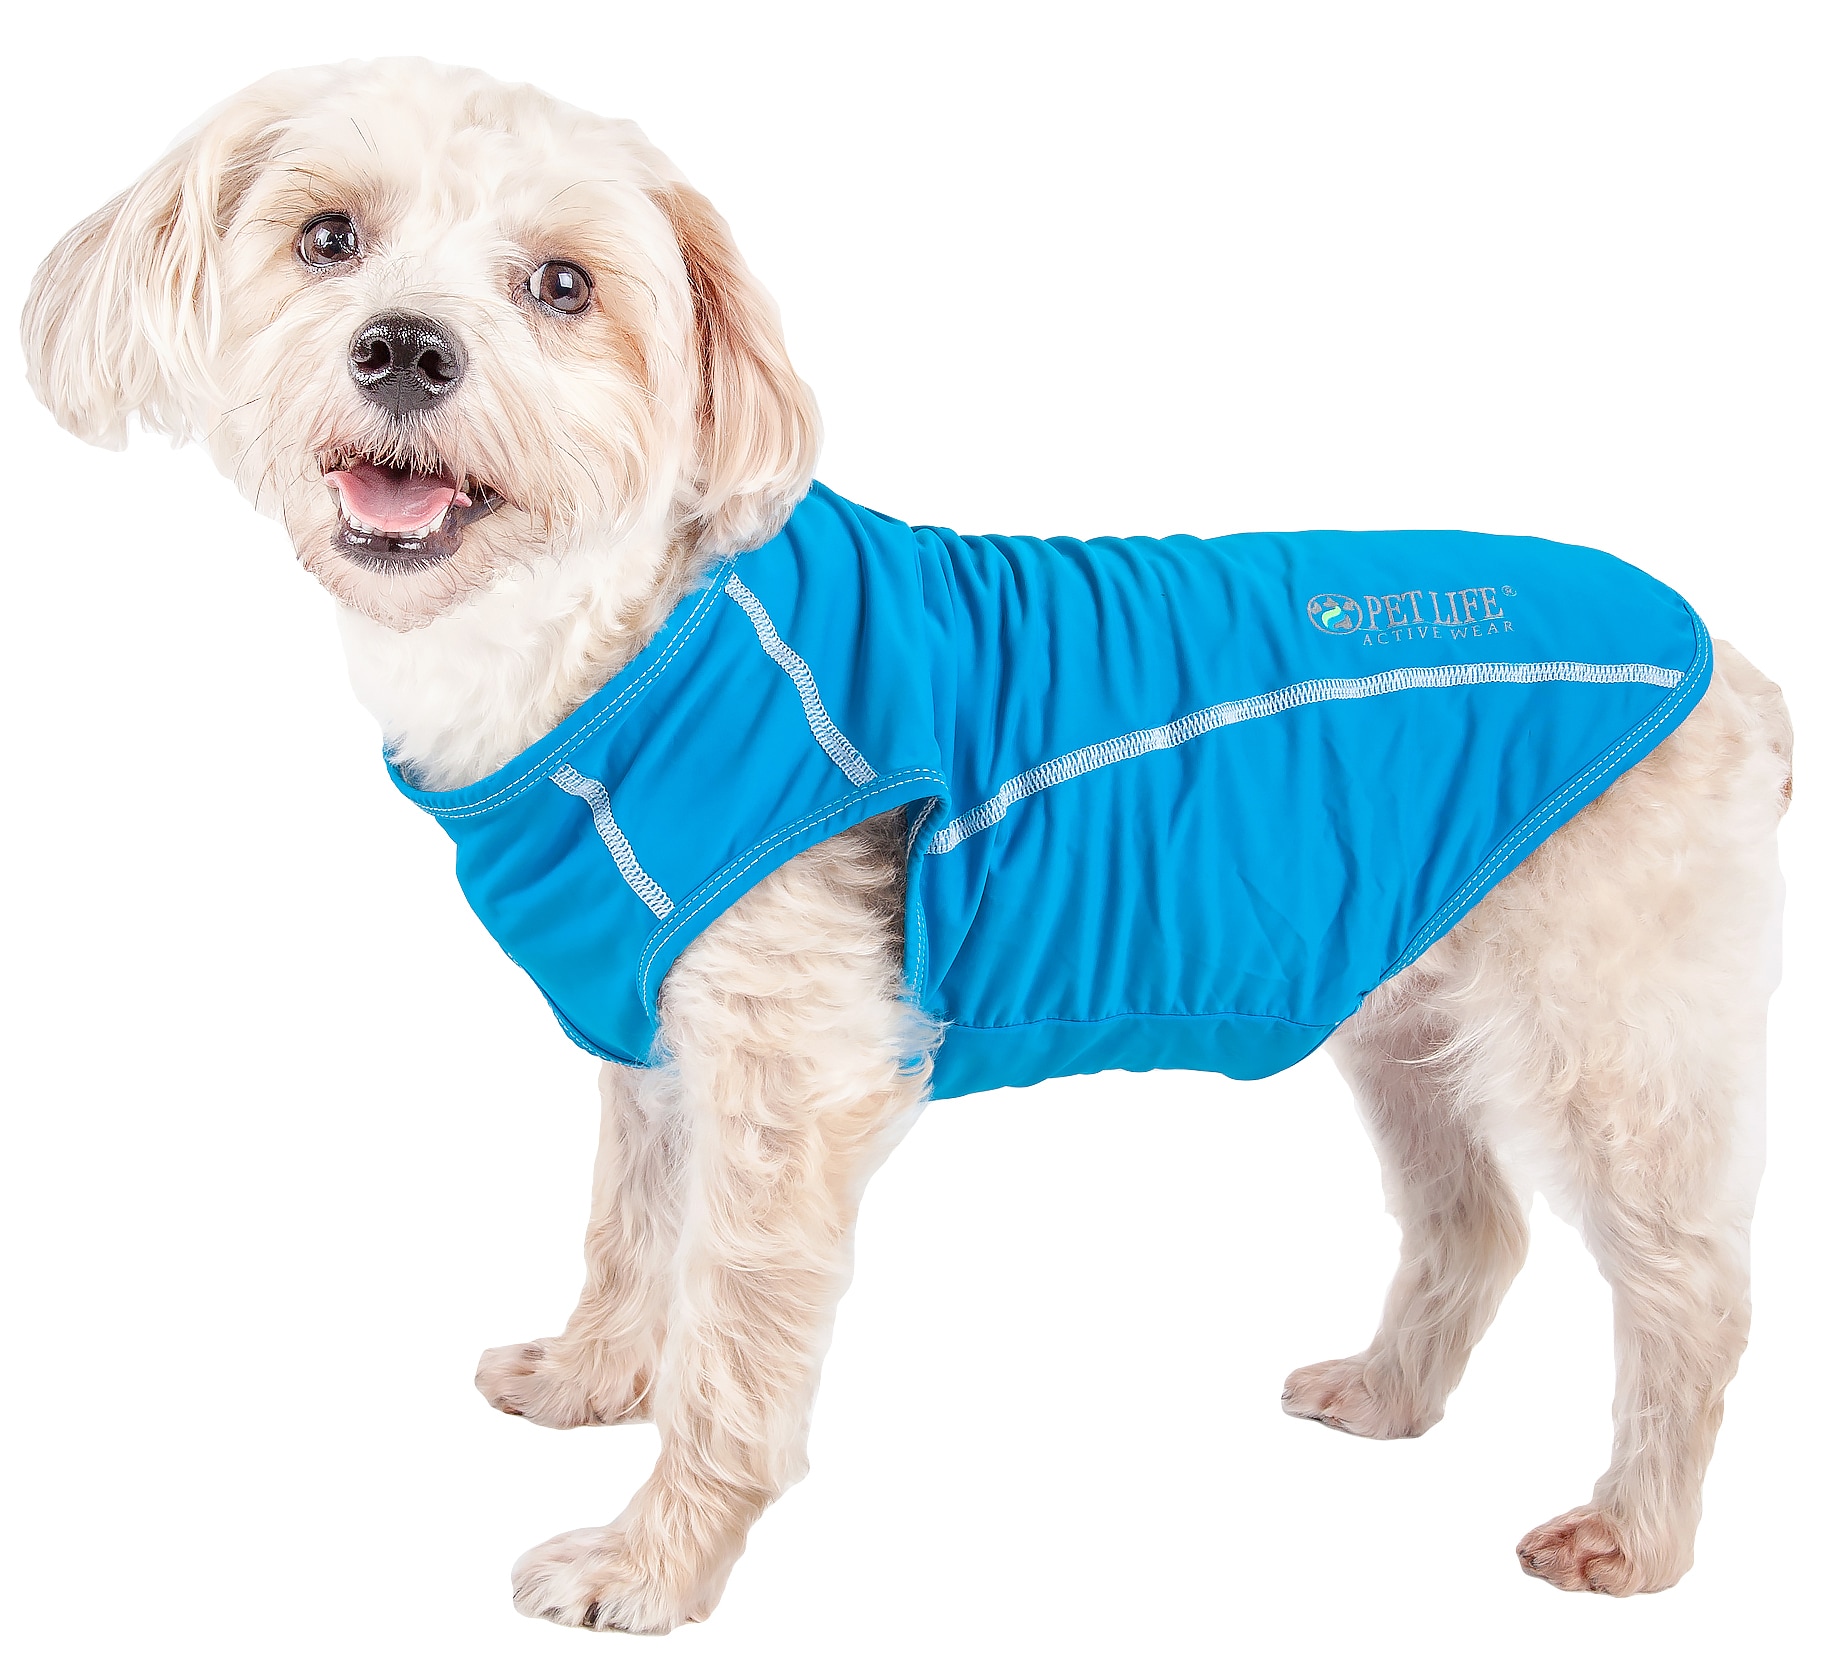 Pets First Tampa Bay Rays Mesh Dog Jersey